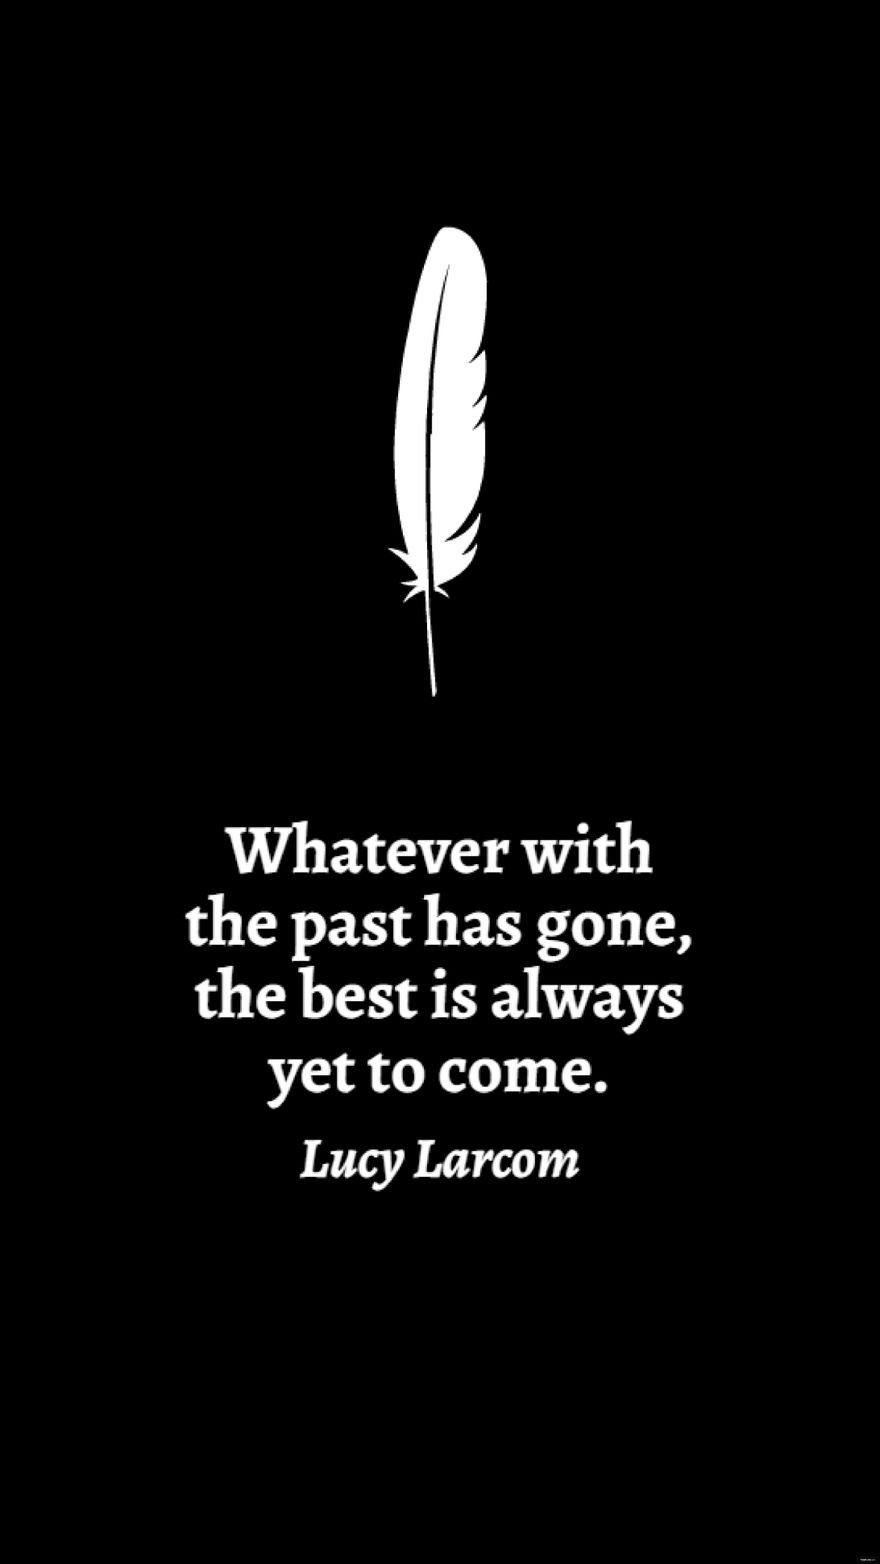 Free Lucy Larcom - Whatever with the past has gone, the best is always yet to come. in JPG